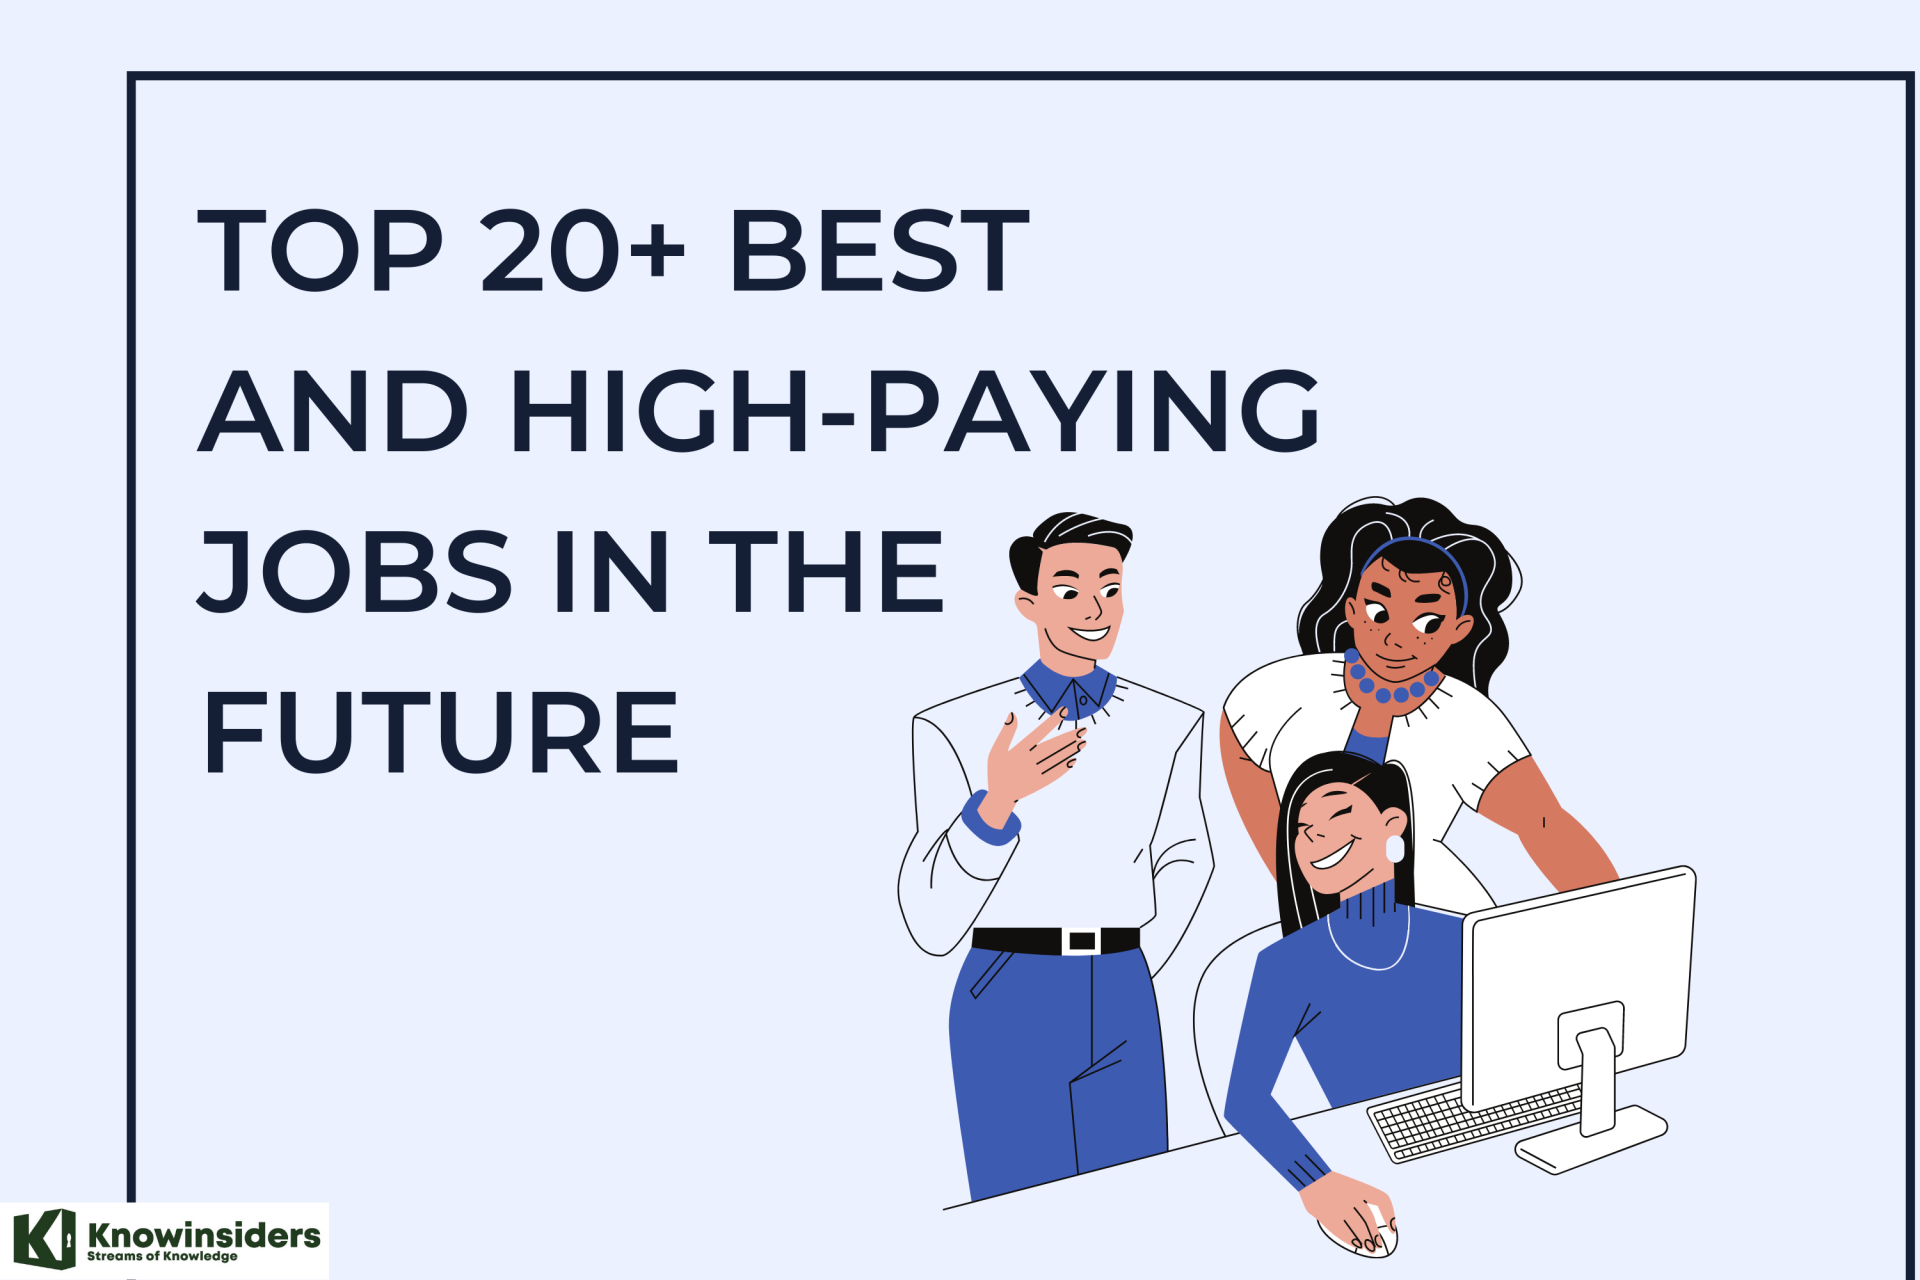 Top 20+ Best and High-Paying Jobs in the Future